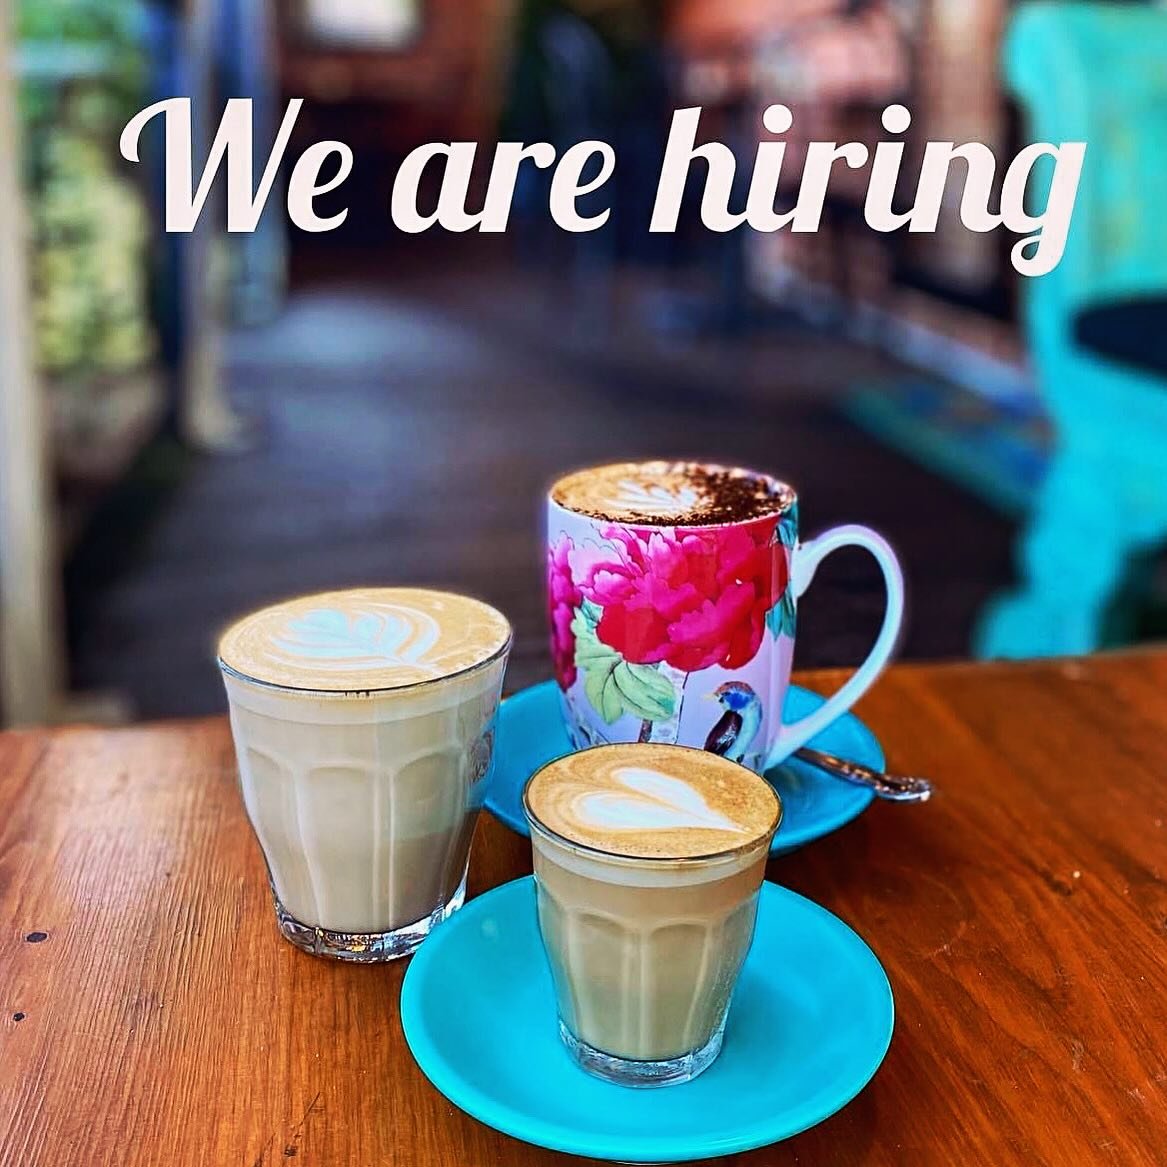 Flora on Tenth is looking for an Experienced Barista who is passionate about making great coffee to join our team for immediate  start. 

Experience in fast paced coffee environment is essential and specialty coffee making is preferred.

The ideal ca